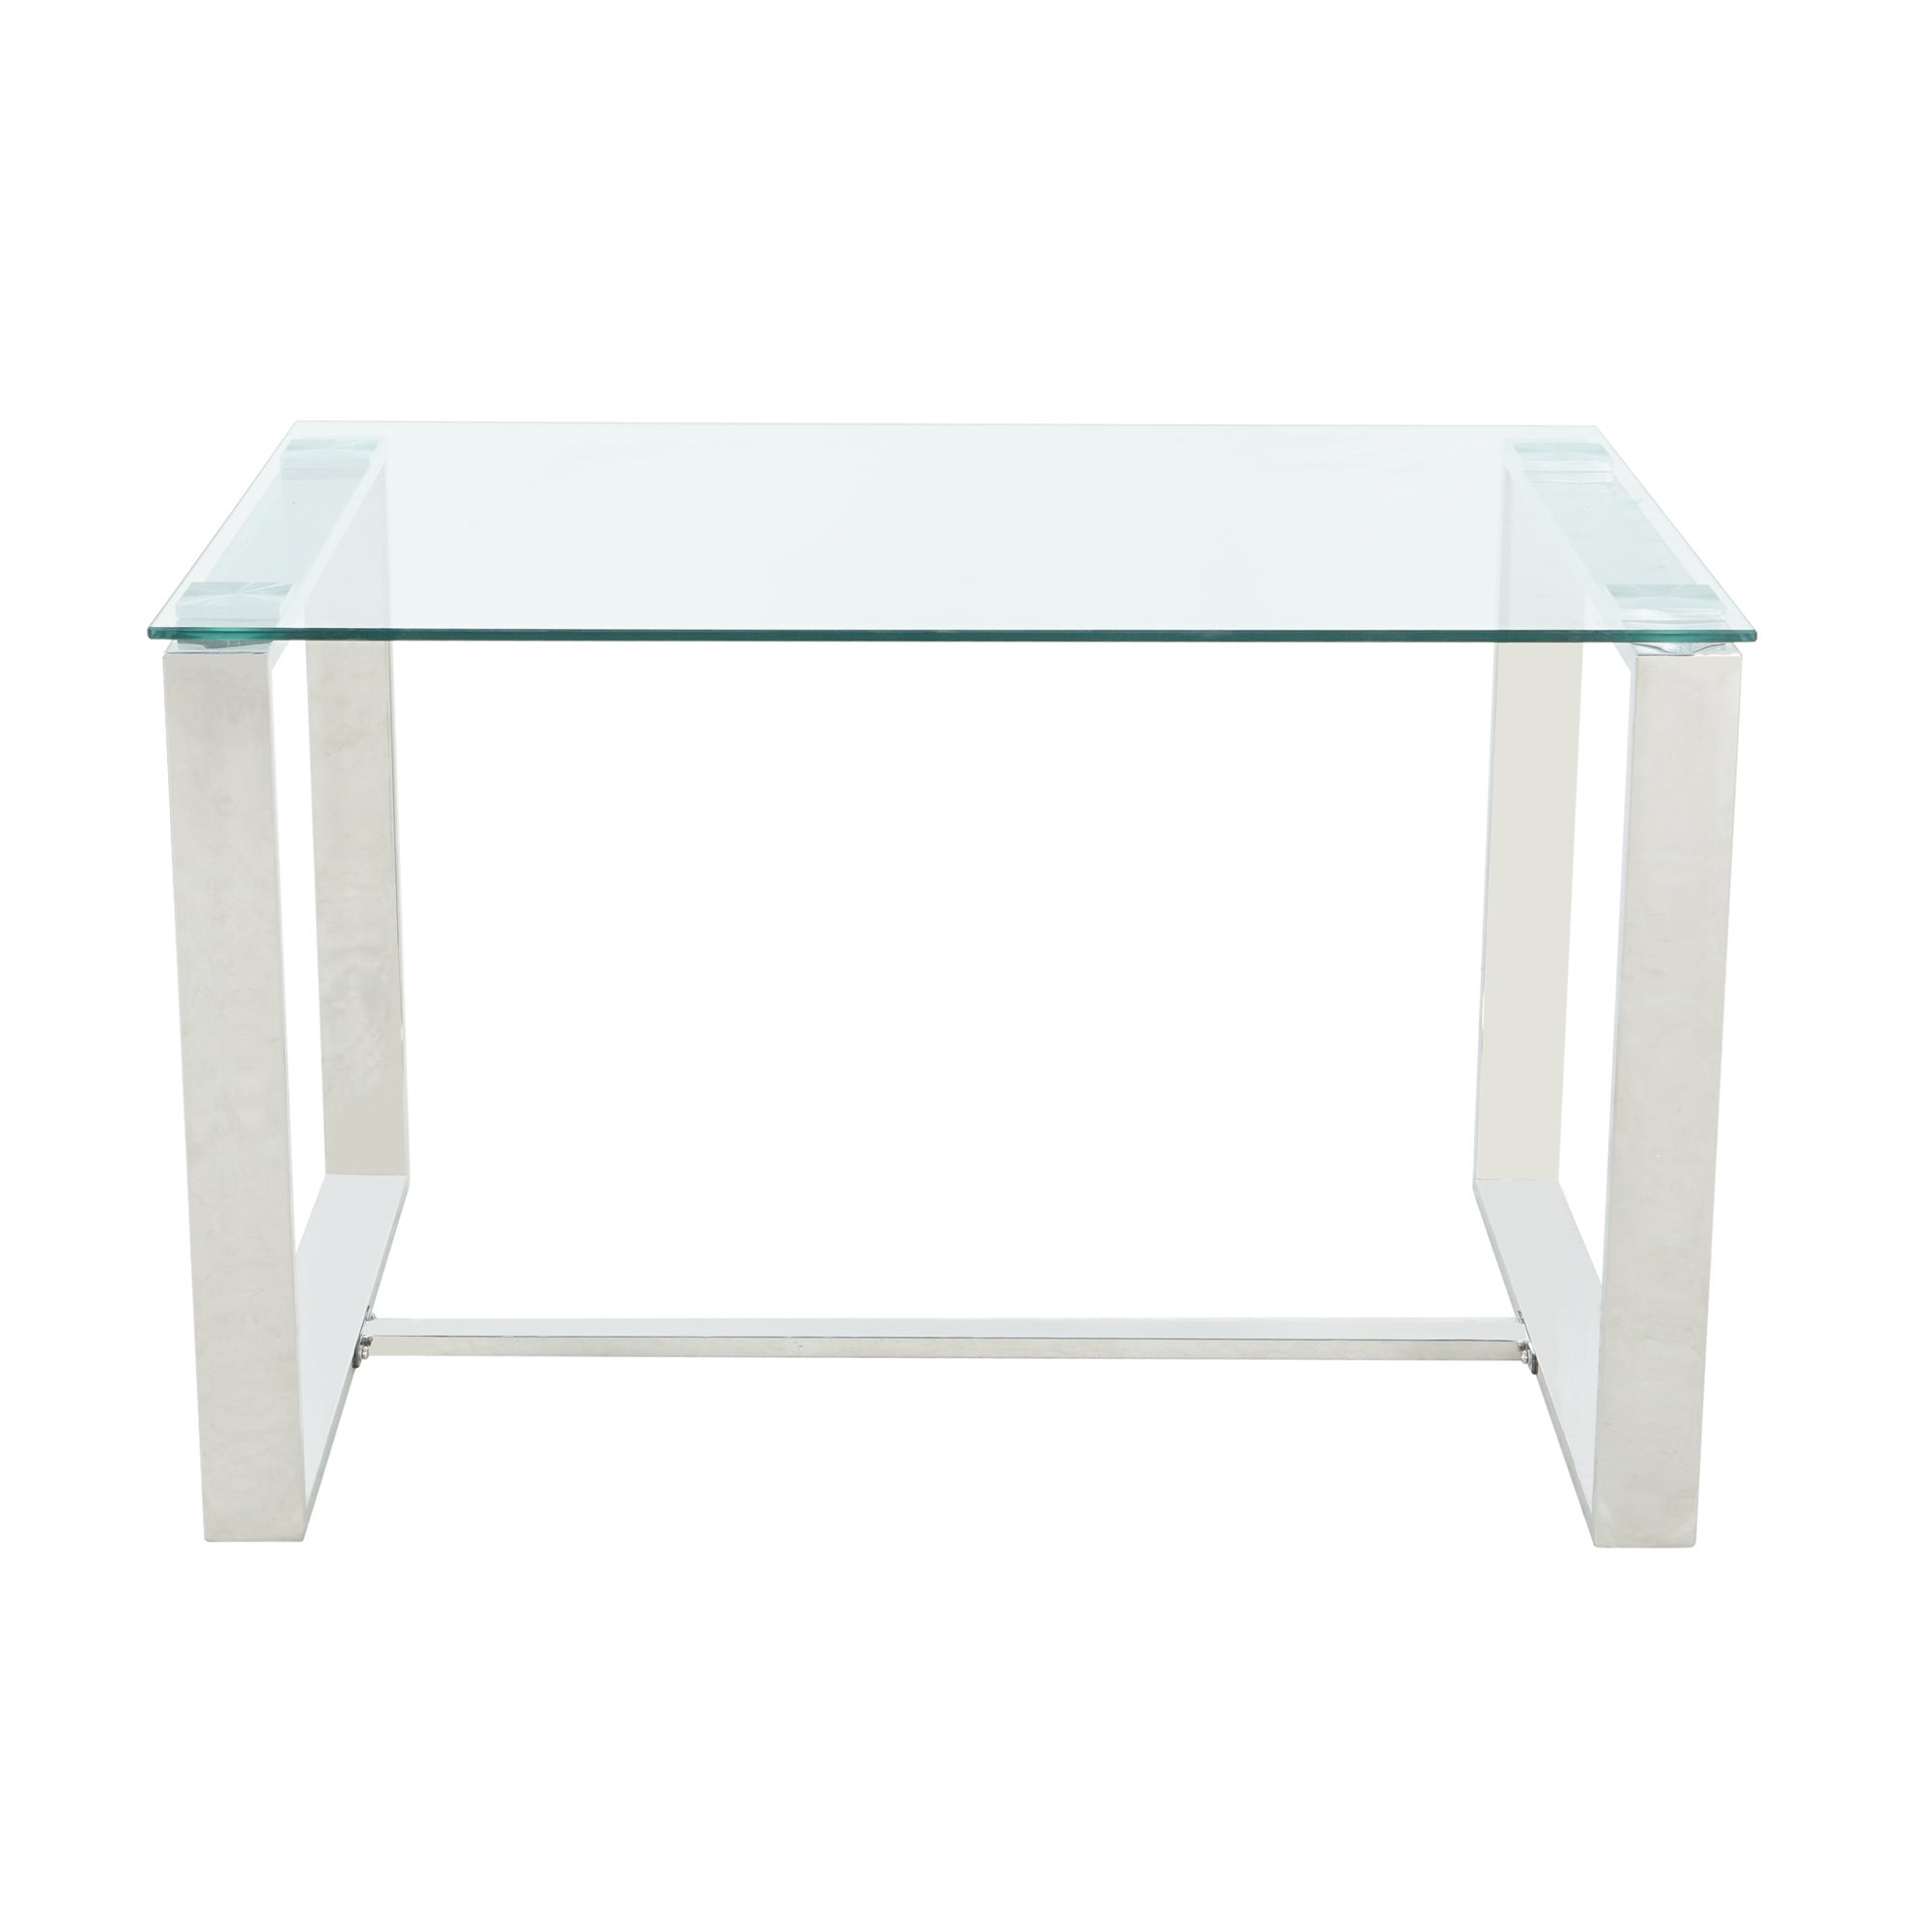 Madison 6 Seater Rectangular Glass Top Dining Table Clear